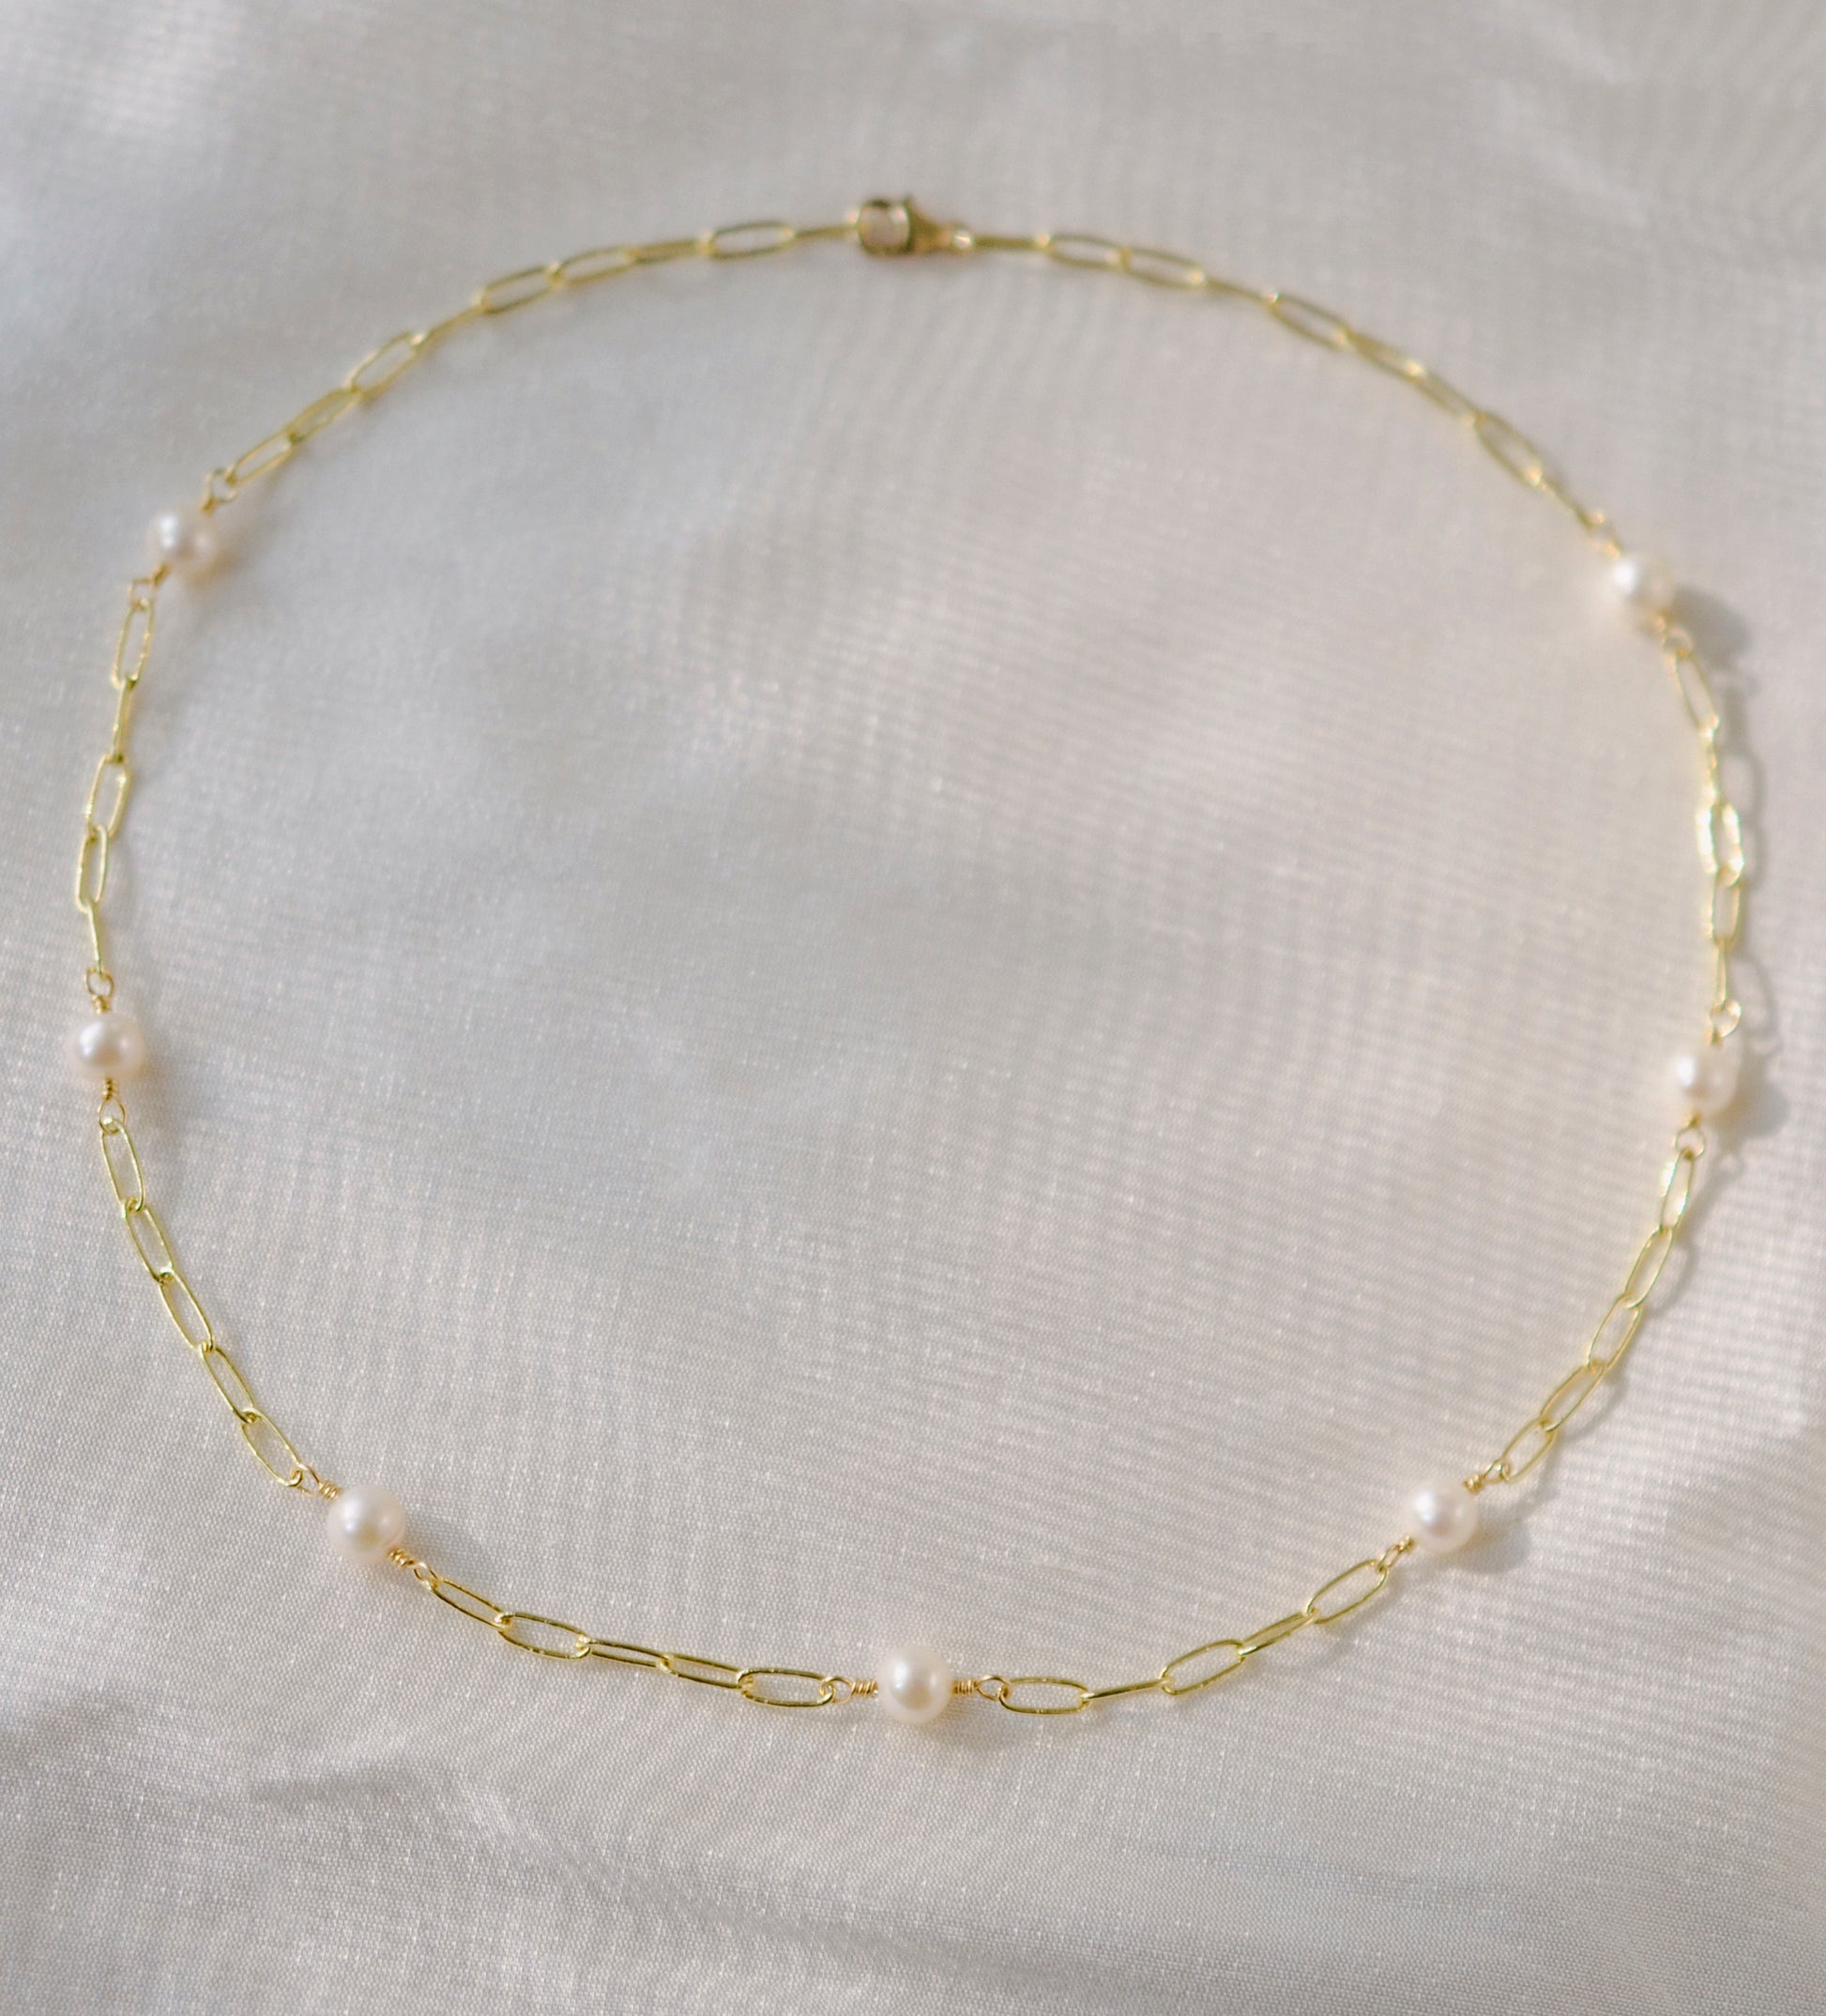 White freshwater pearls set onto a gold paperclip style chain. The paperclip style has elongated links.